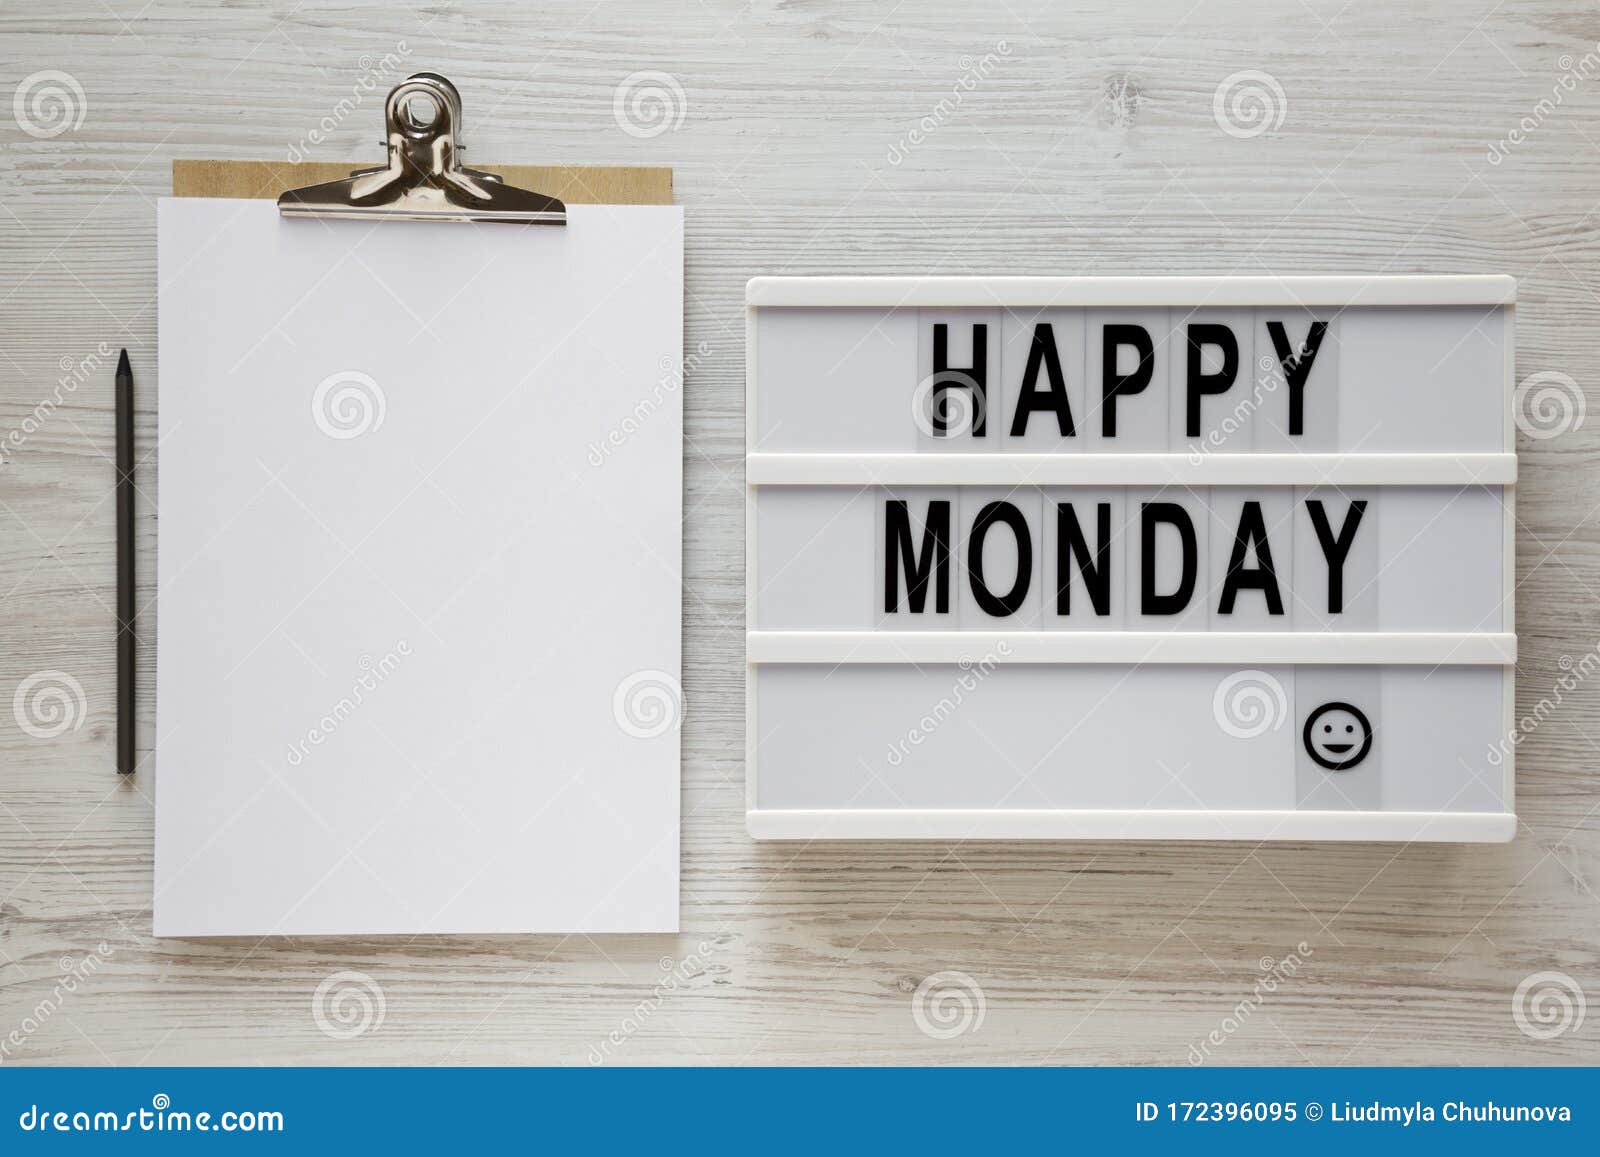 `Happy Monday` Words on a Lightbox, Clipboard with Blank Sheet of Paper ...